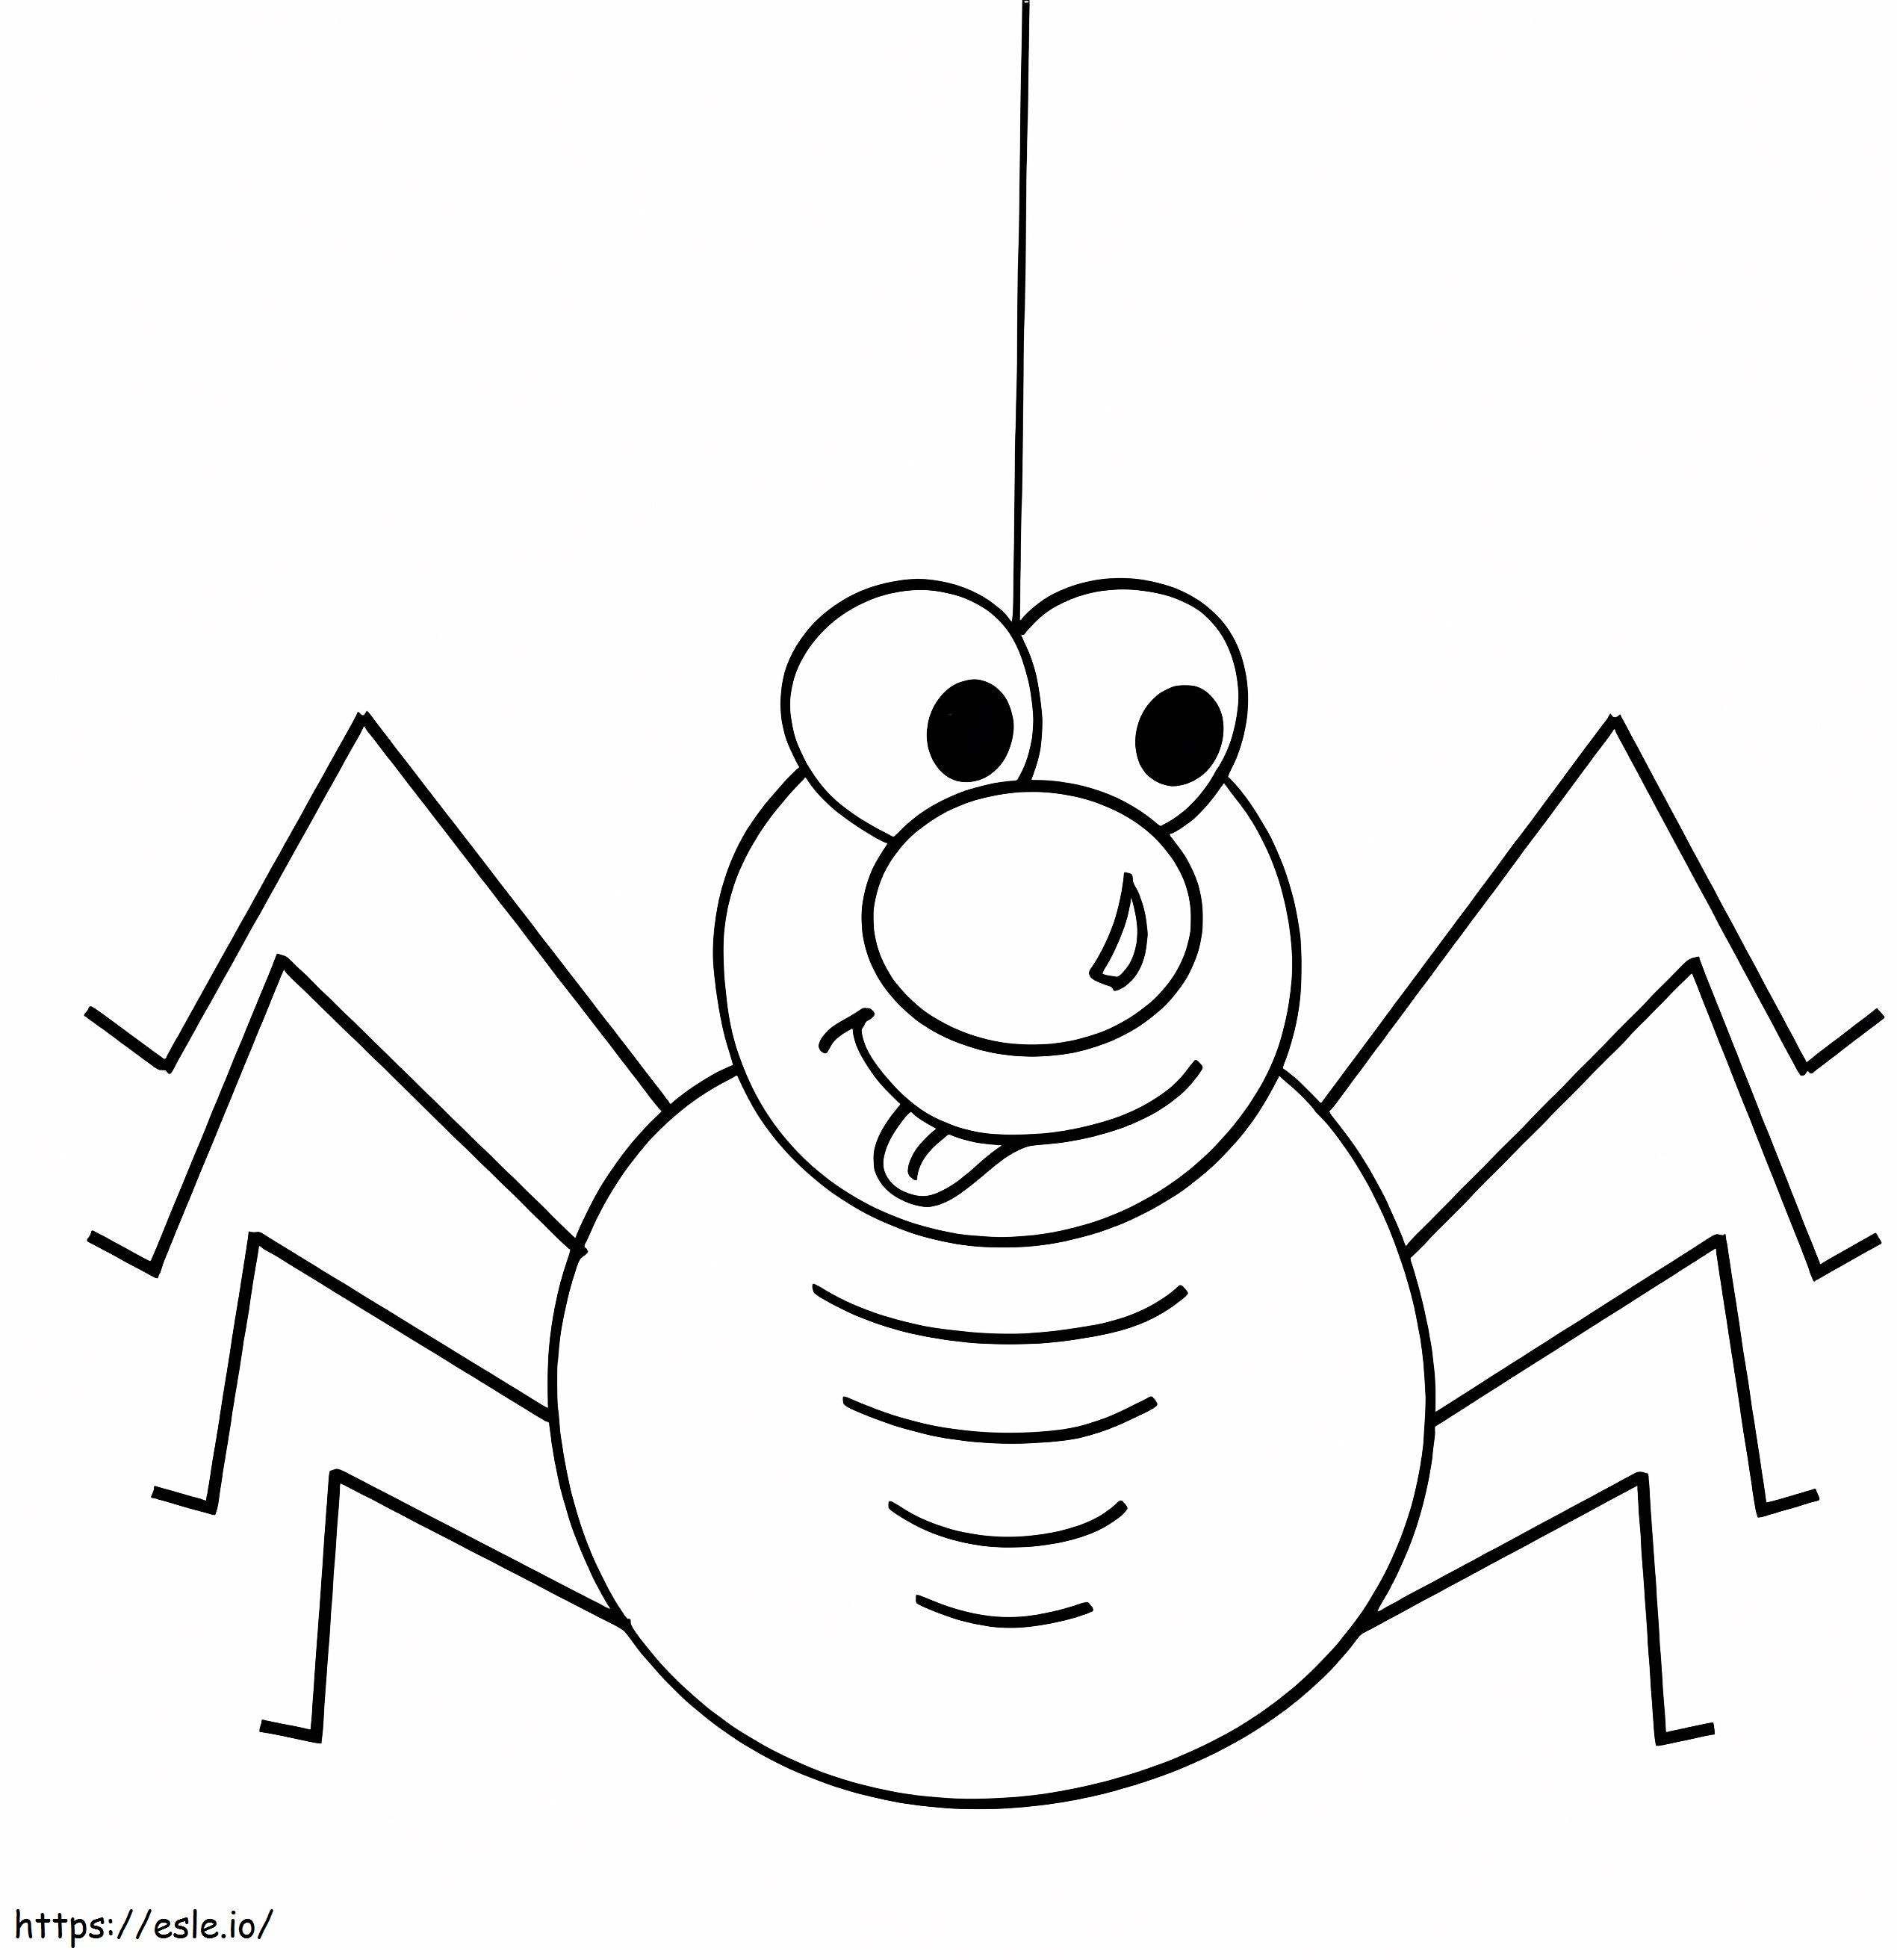 Printable Funny Spider coloring page